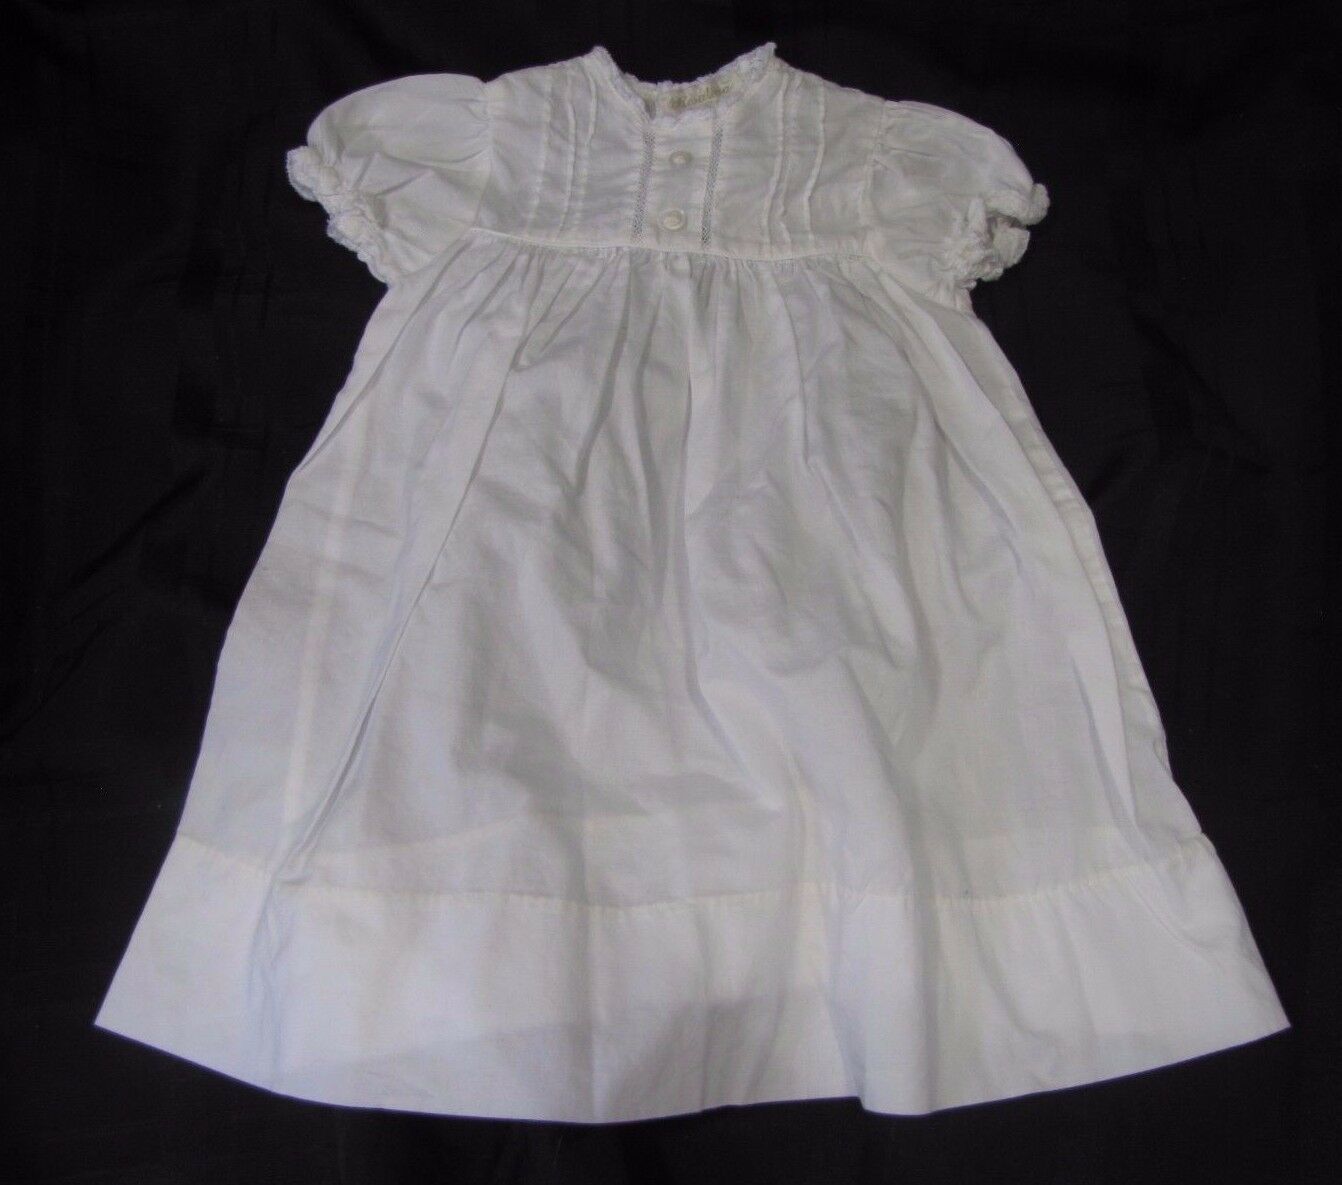 Primary image for ROSALINA LIGHTWEIGHT BABY INFANT GIRL WHITE COTTON DRESS 0-3 EUC